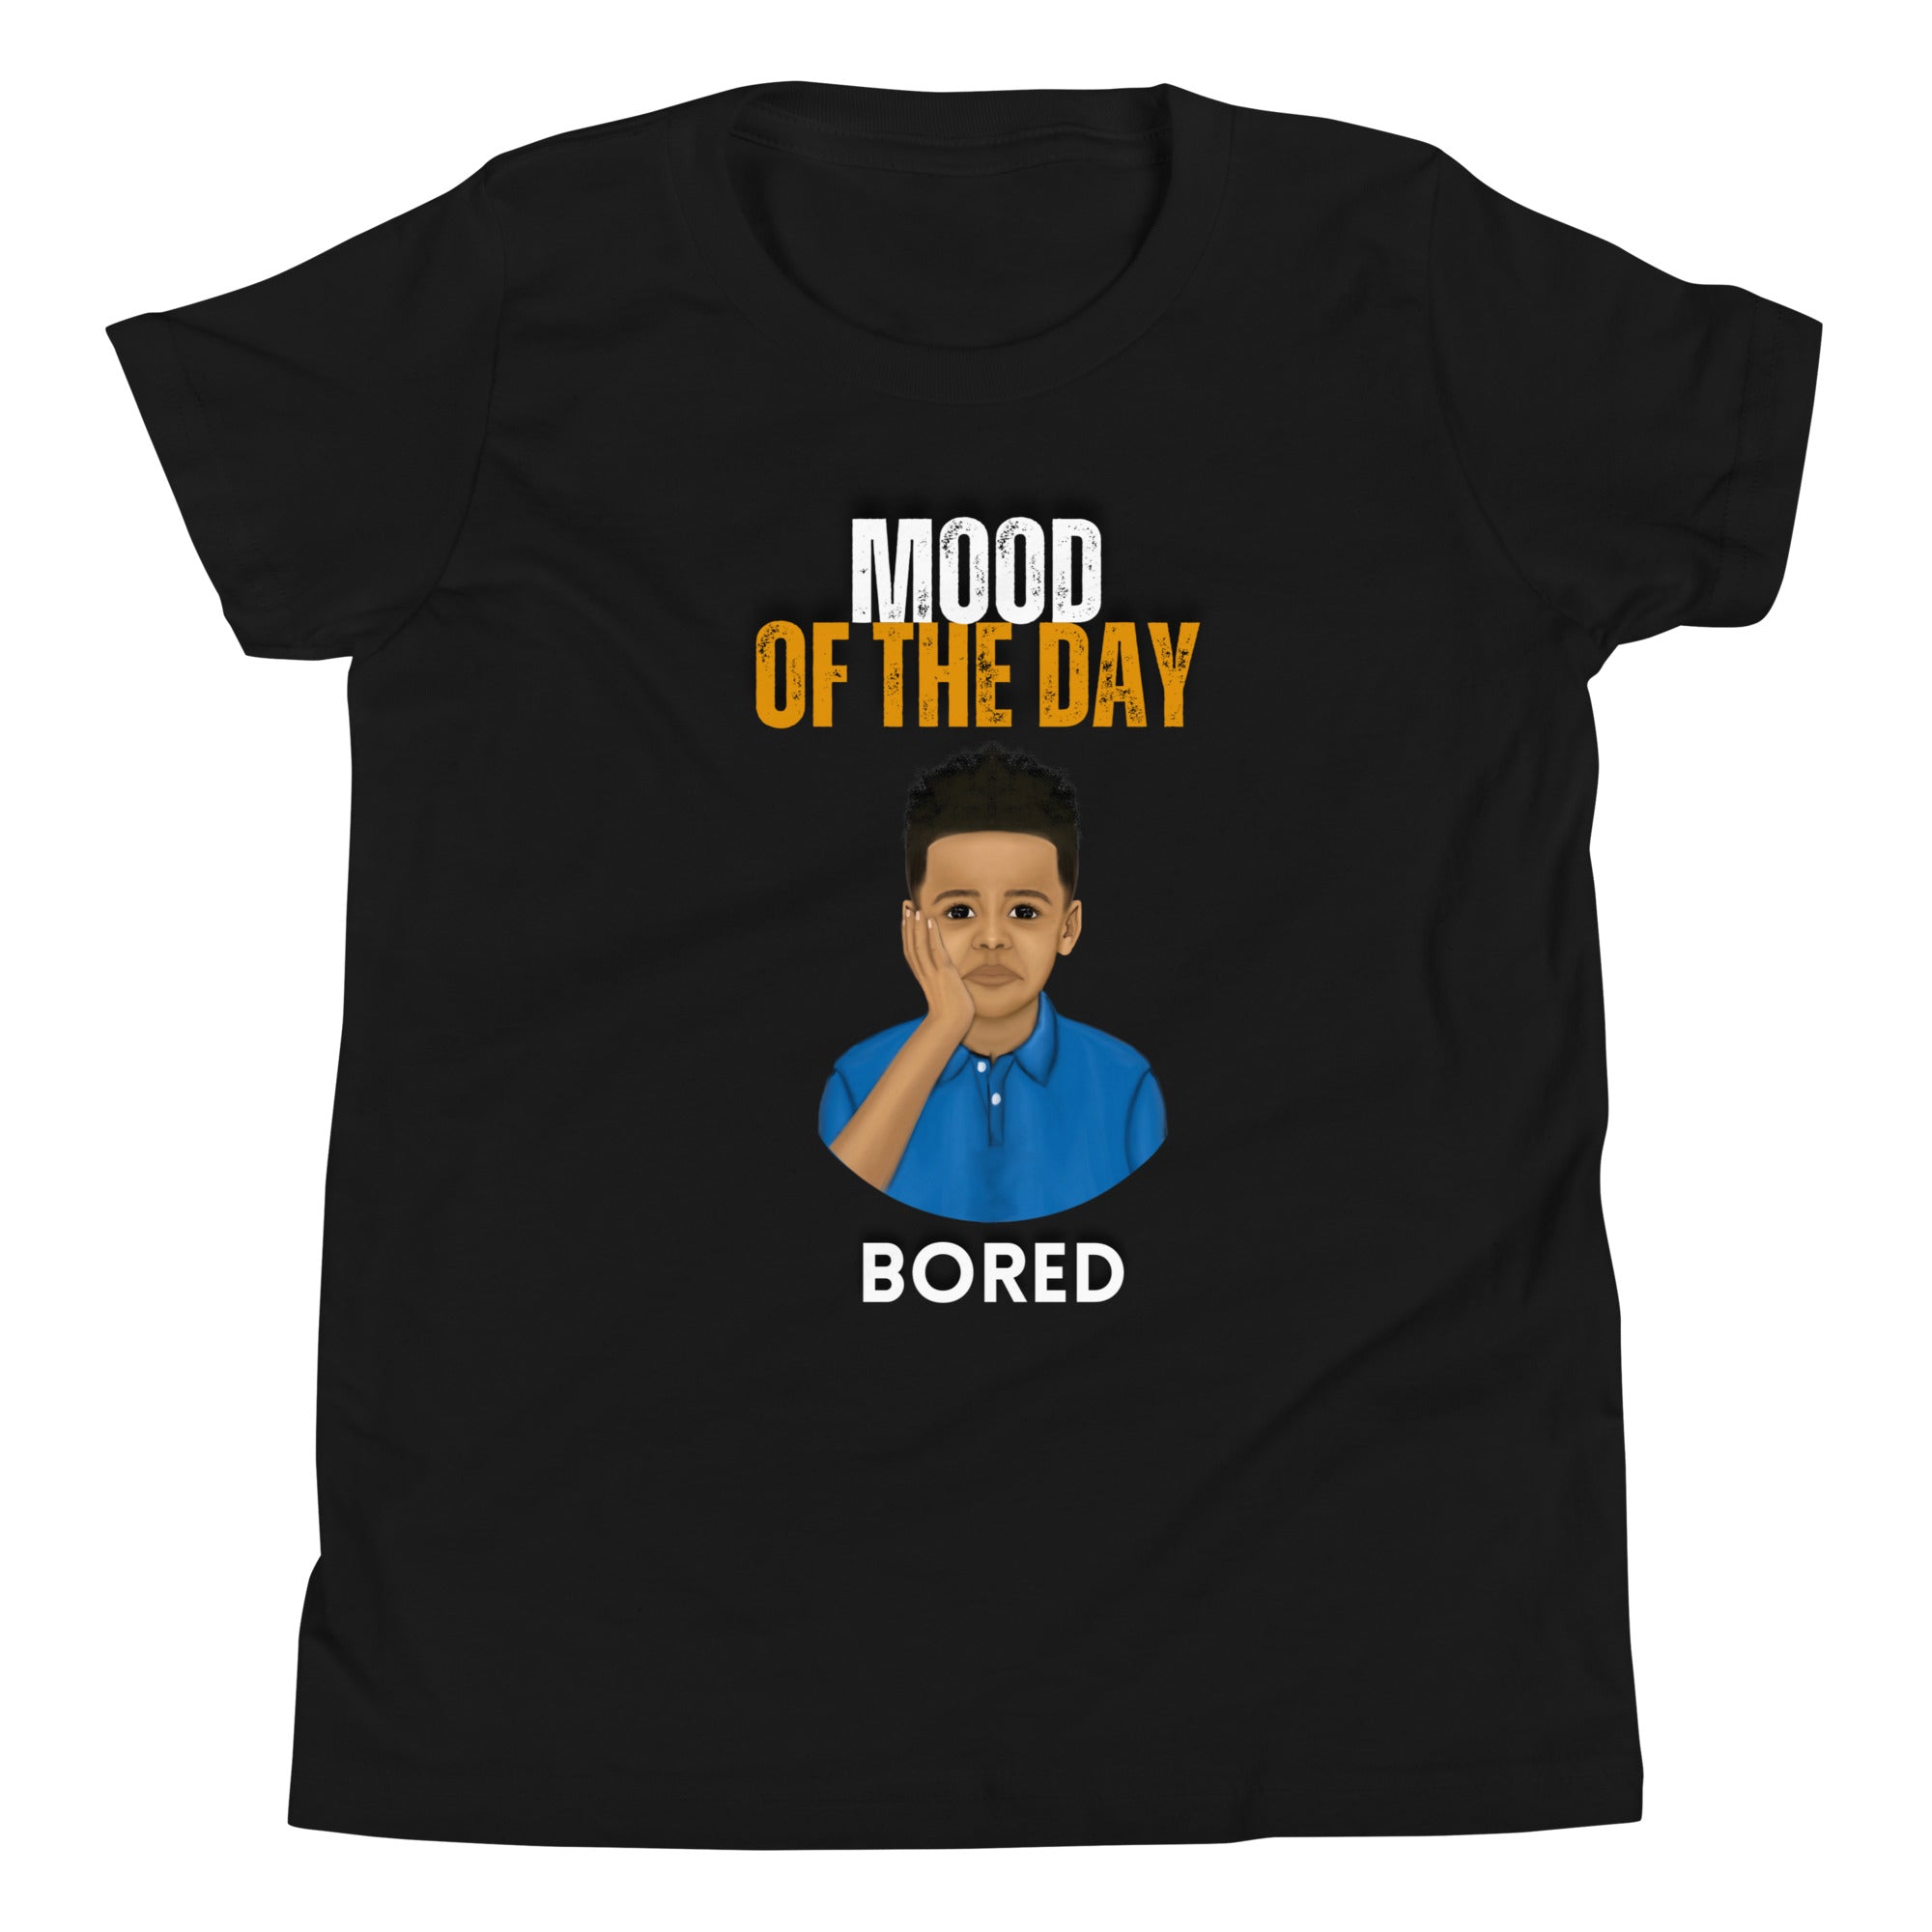 Youth Mood of the Day T-shirt - Bored